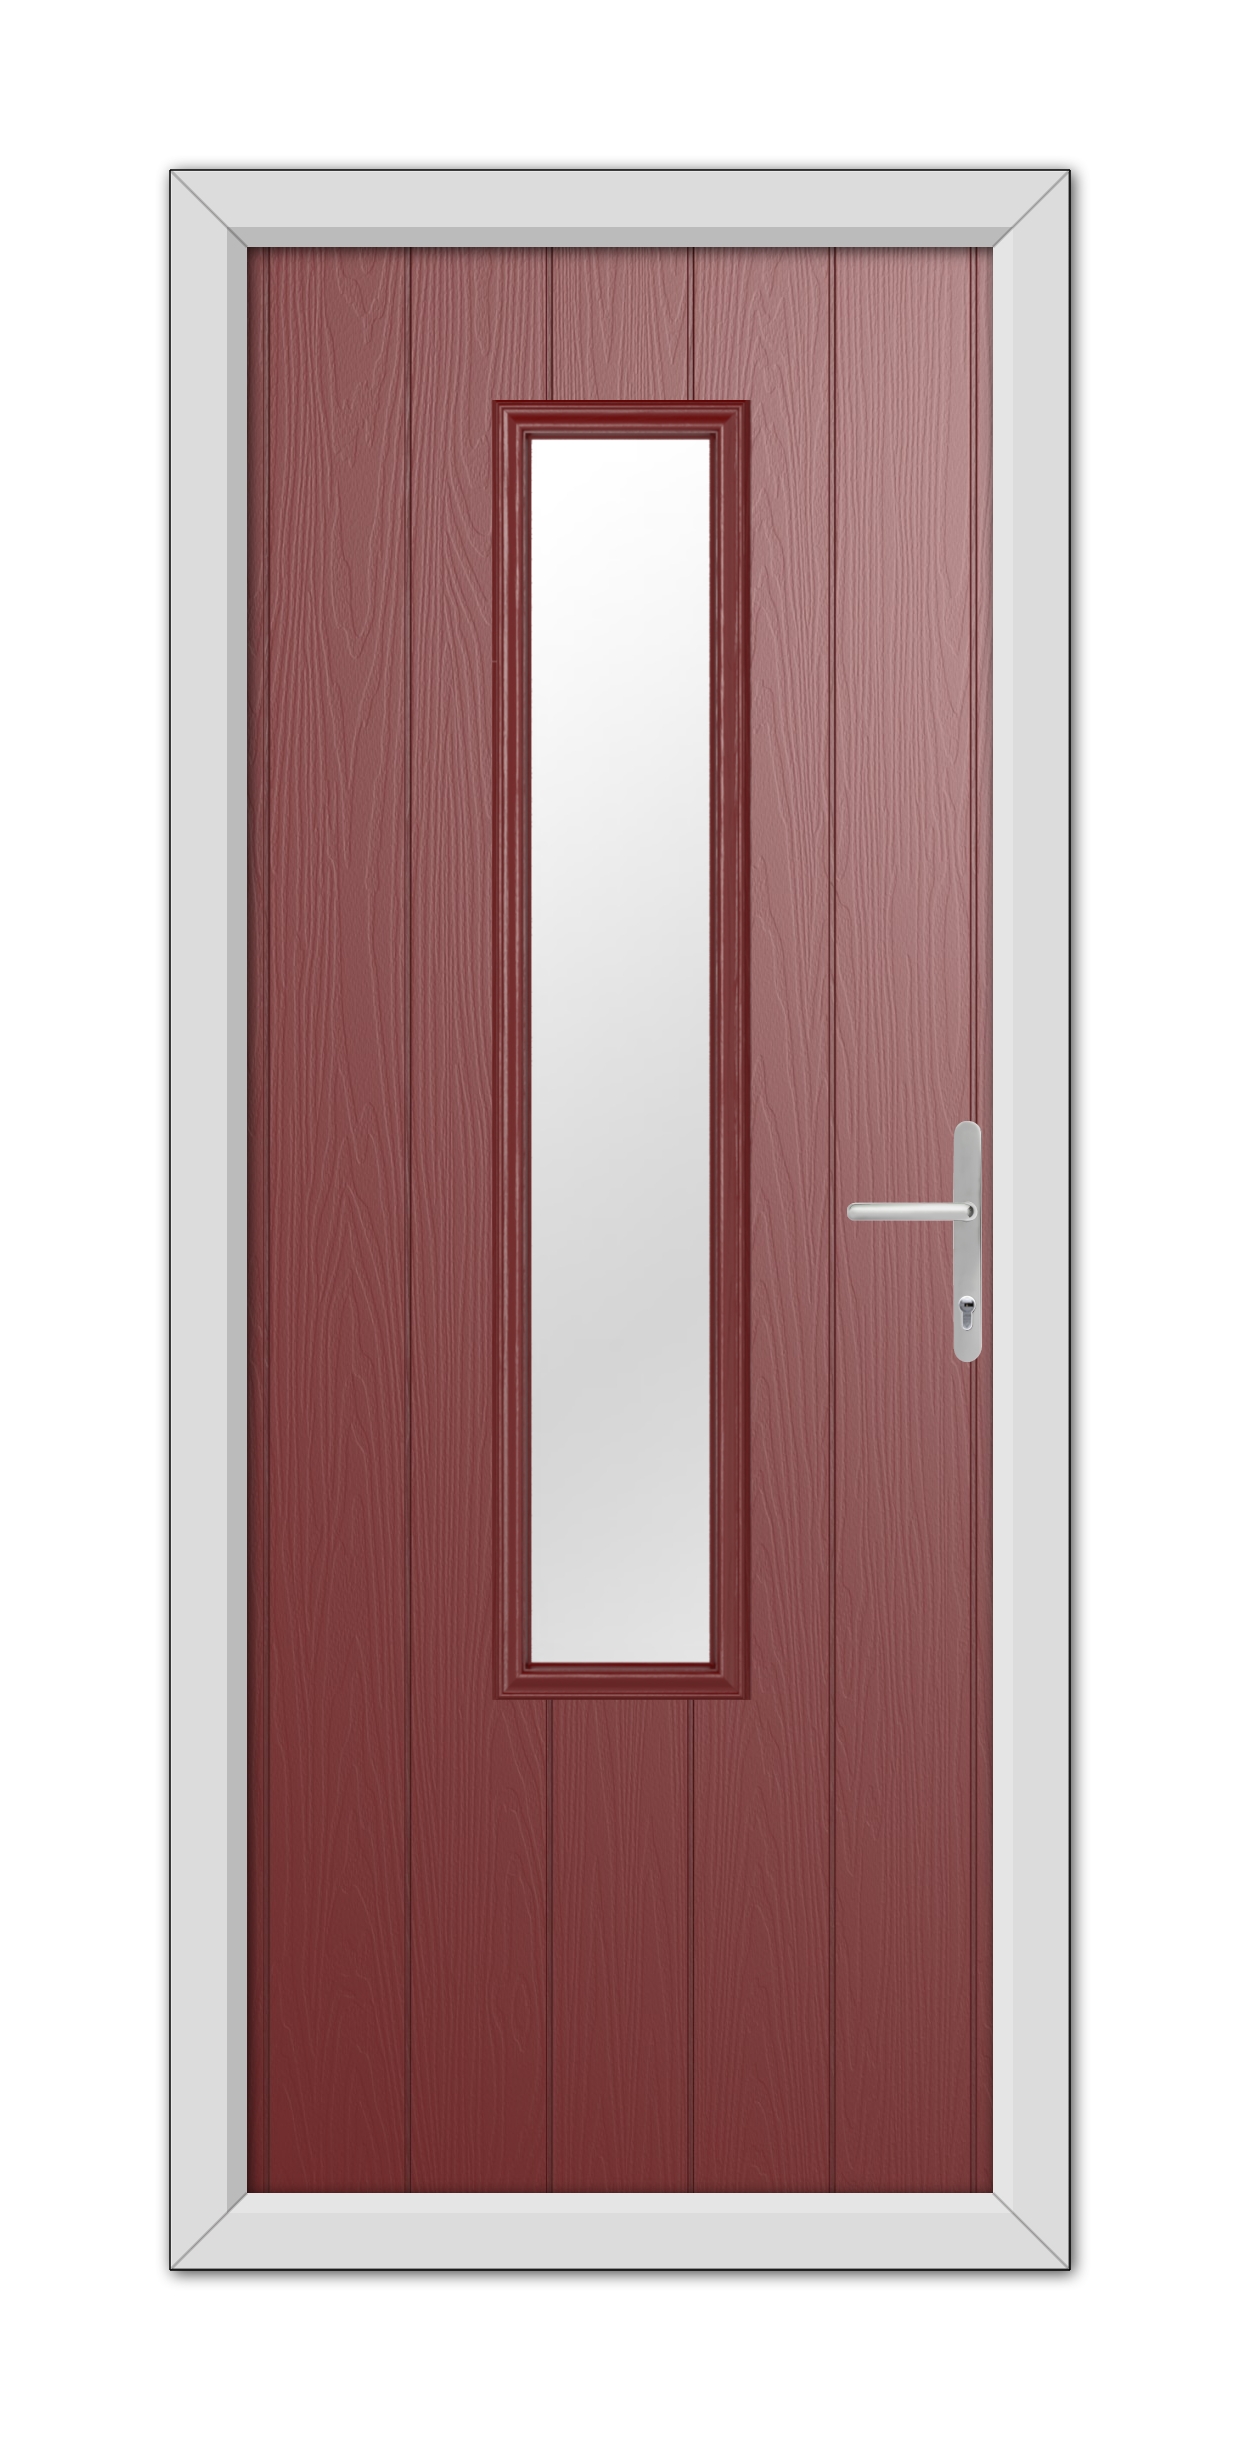 A modern Red Abercorn Composite Door 48mm Timber Core featuring a vertical, rectangular glass panel in the center and a metallic handle on the right, set within a white frame.